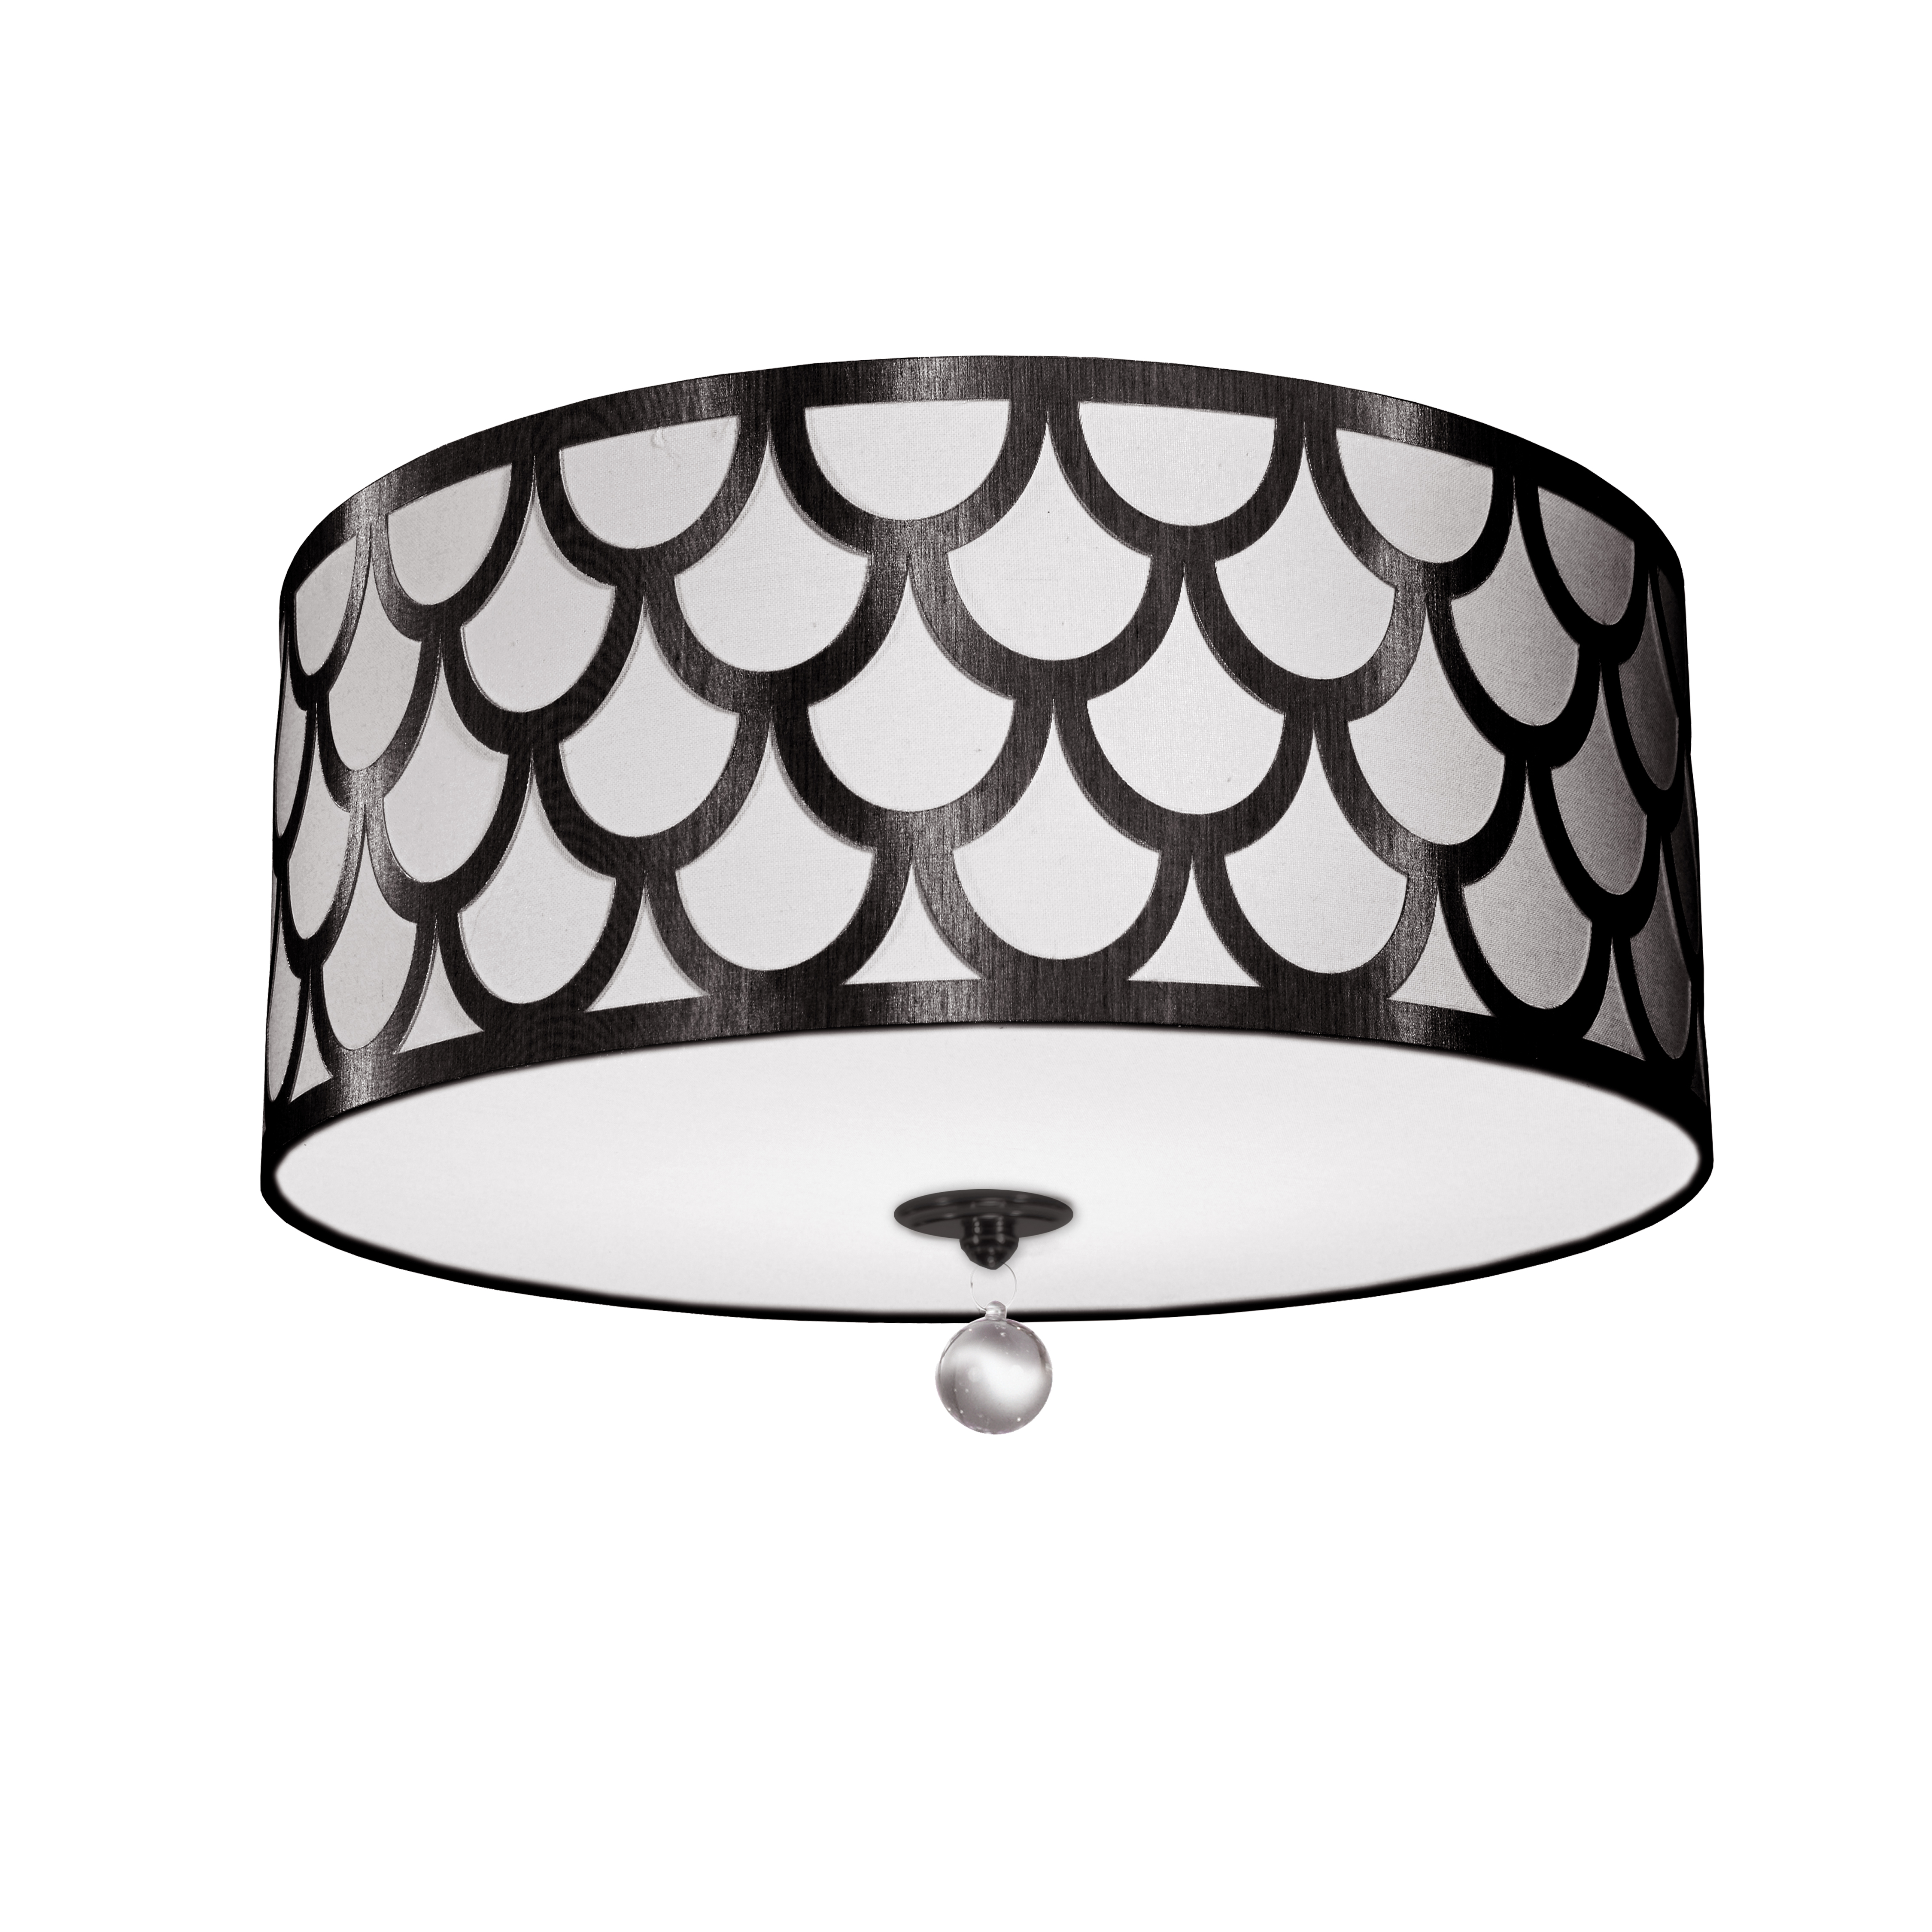 With its elegant patterning and classic shape, the Hannah family of lighting has a timeless look, delivered with clean modern style. The design delivers eye-catching style by paying attention to the details. A discrete metal frame keeps the focus on the fabulously fashionable fabric shade. The two color design features a white base in Italian linen, with a scalloped overlay in a contrasting hue. It's a chic look in premium materials that conveys a sense of luxury to your foyer or living room.